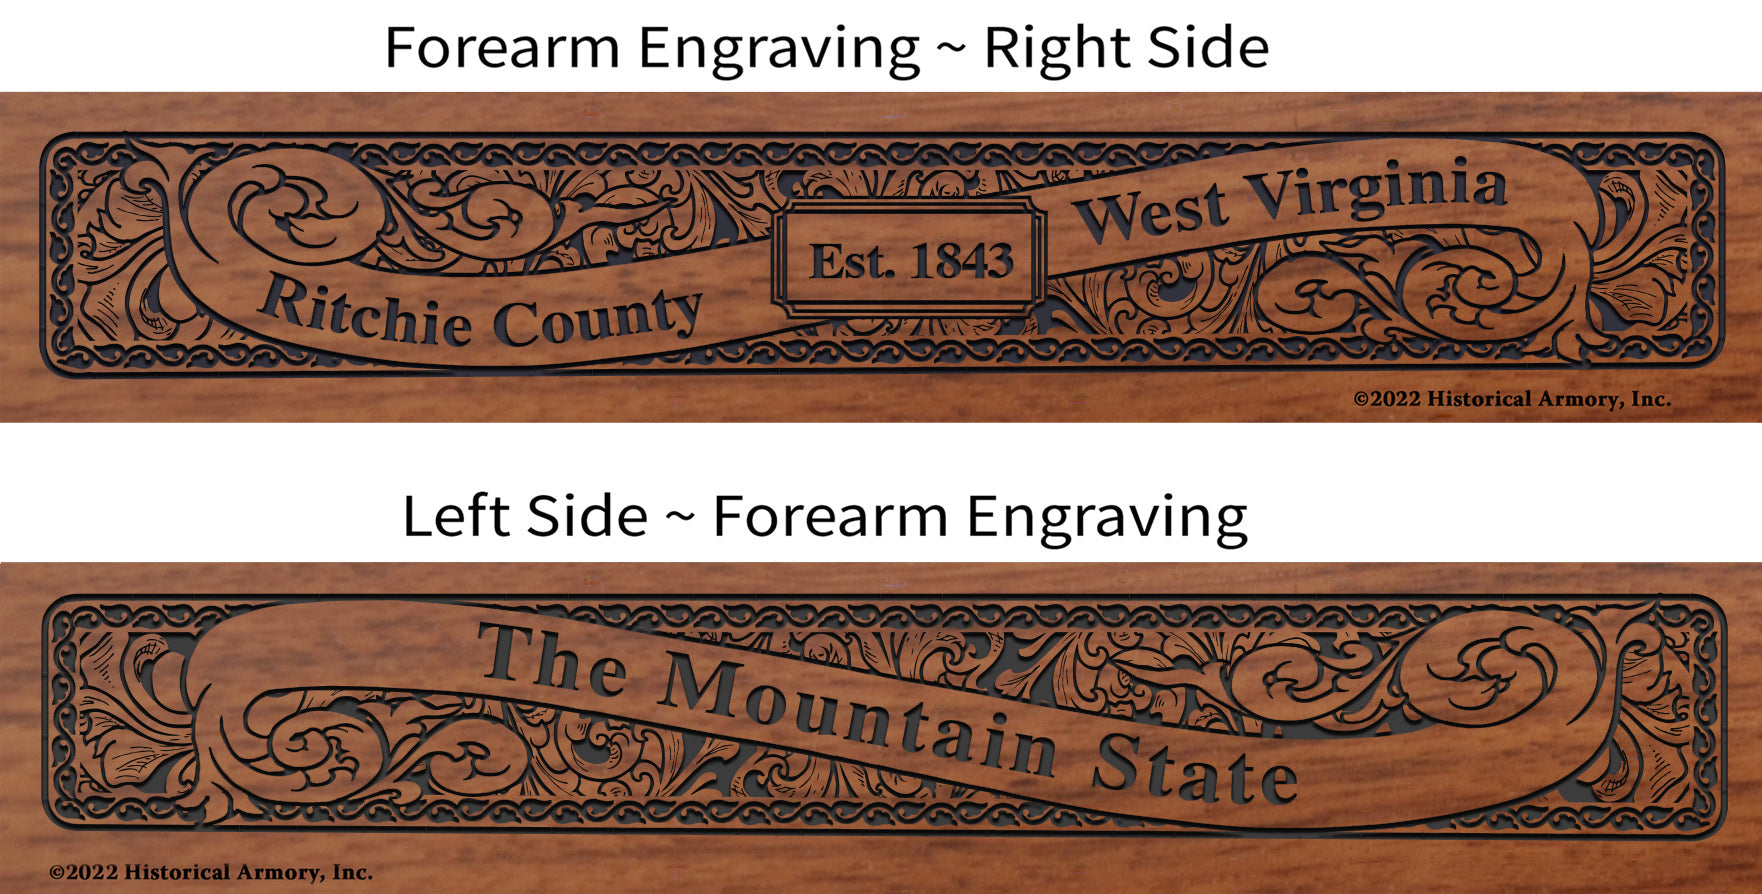 Ritchie County West Virginia Engraved Rifle Forearm